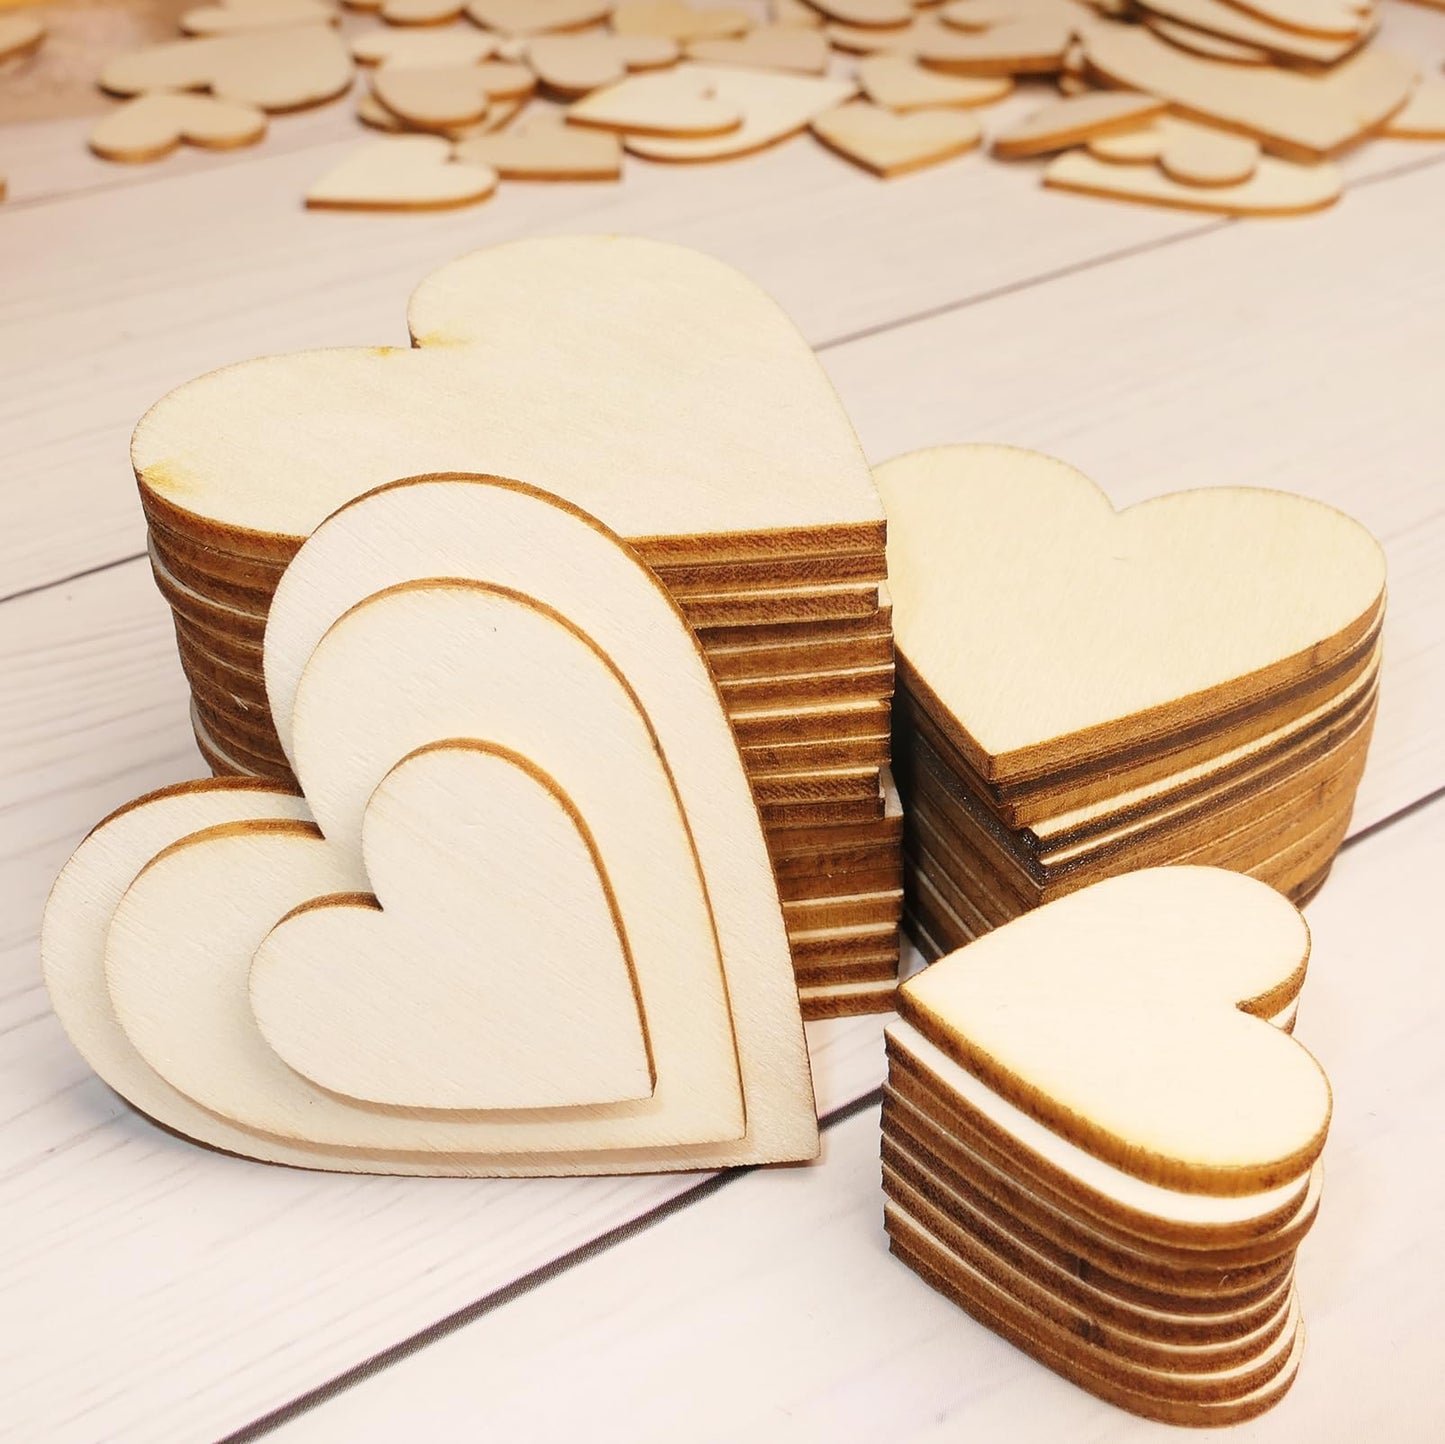 HADDIY Small Wood Hearts for Crafts,175 Pcs Different Size Unfinished Wooden Heart Cutouts Pieces for Wedding Guest Book,Valentine'Day Craft and